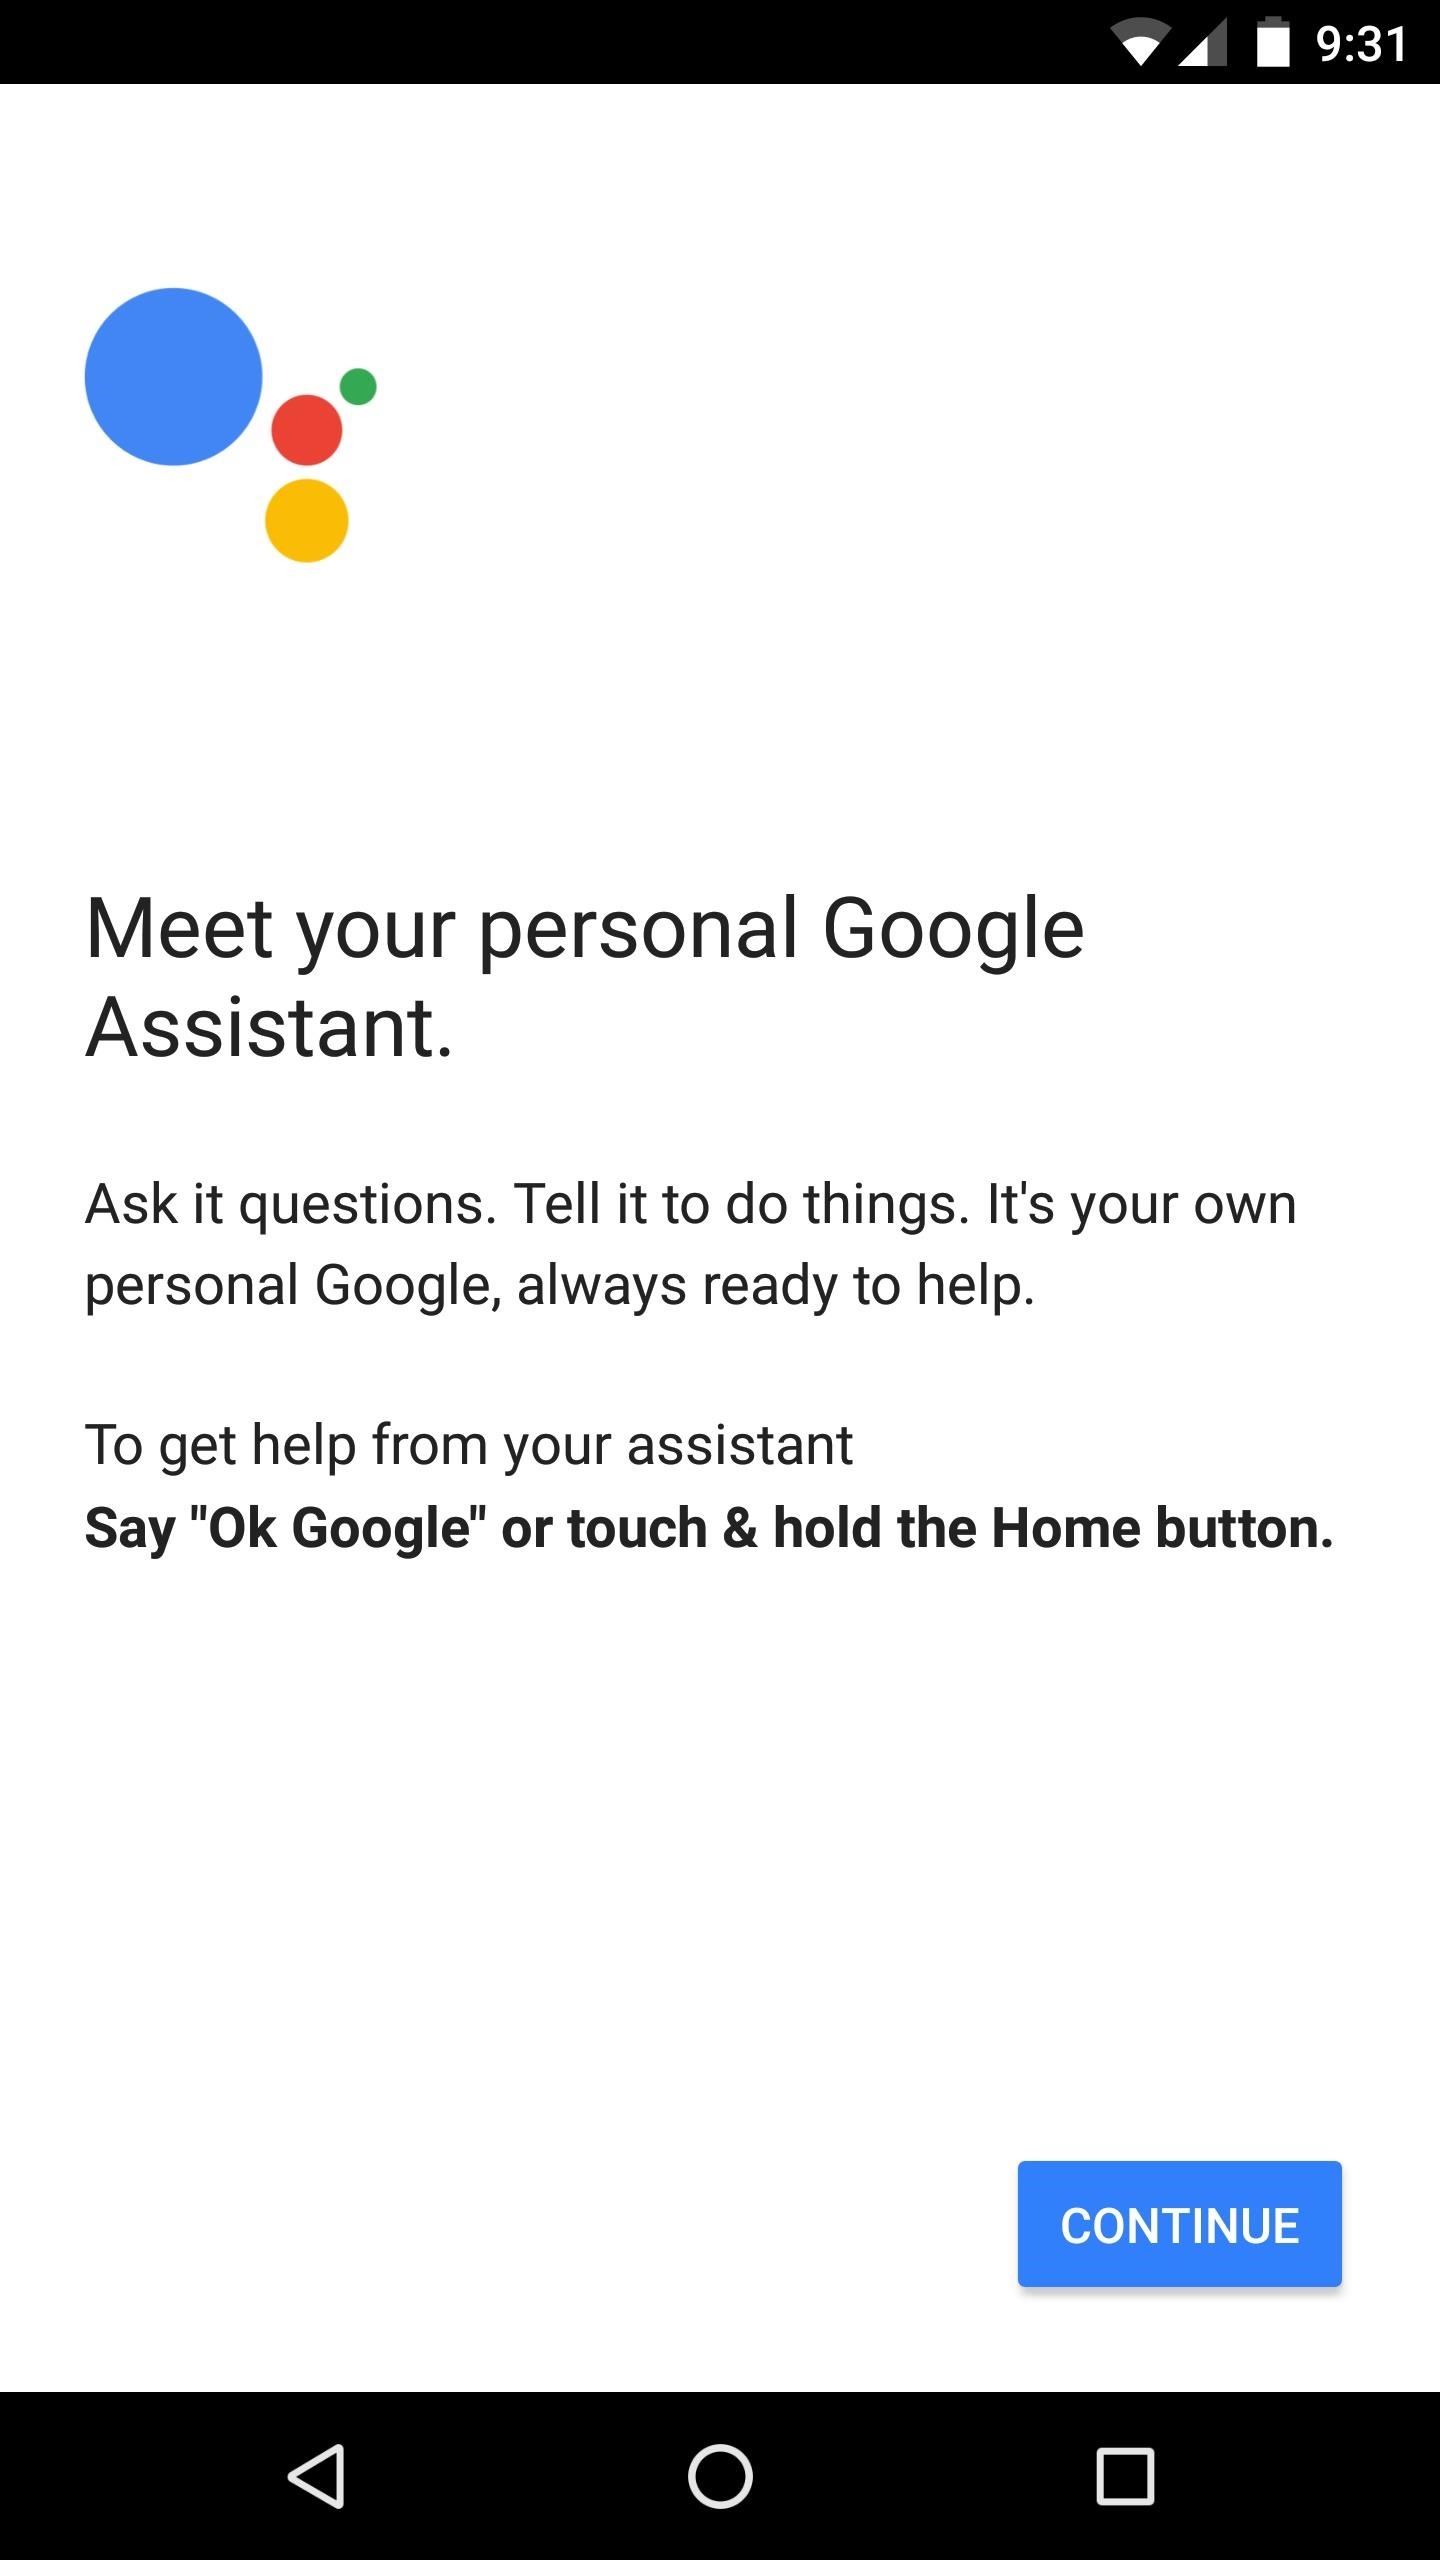 How to Get the Pixel's Google Assistant Working on Other Android Devices